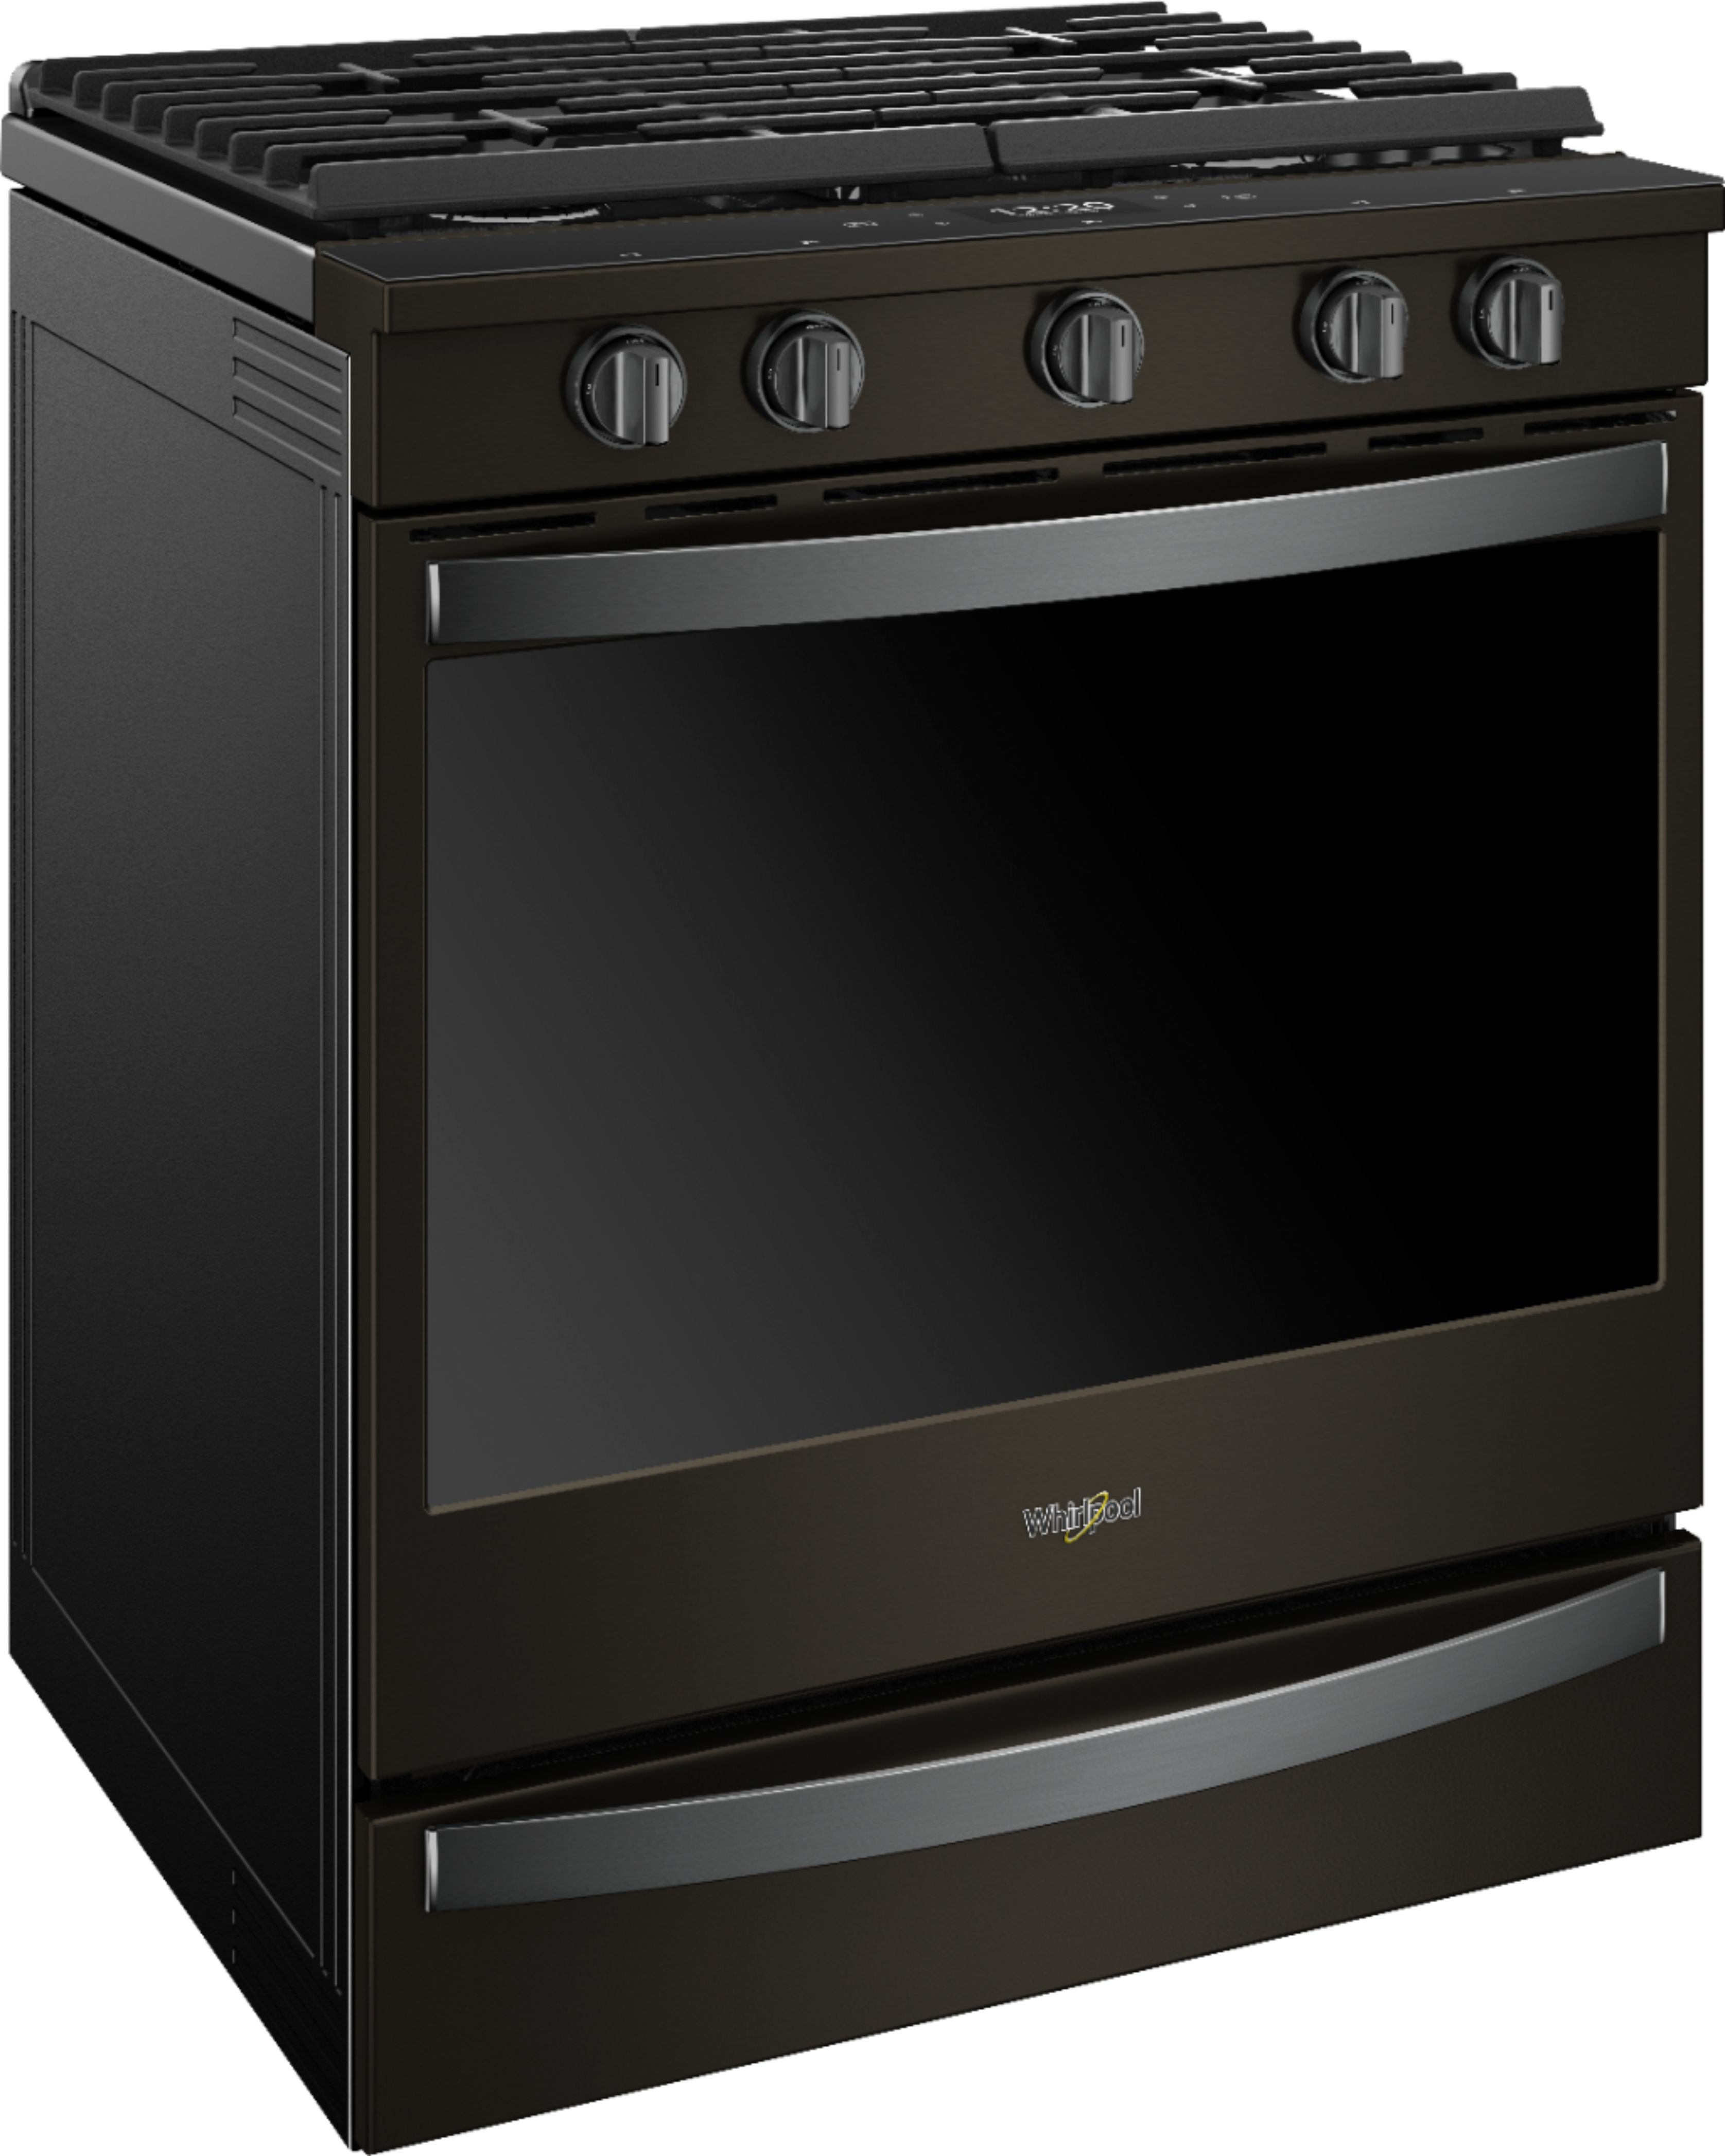 Angle View: LG - 6.3 Cu. Ft. Slide-In Gas Range with ProBake Convection - Stainless steel